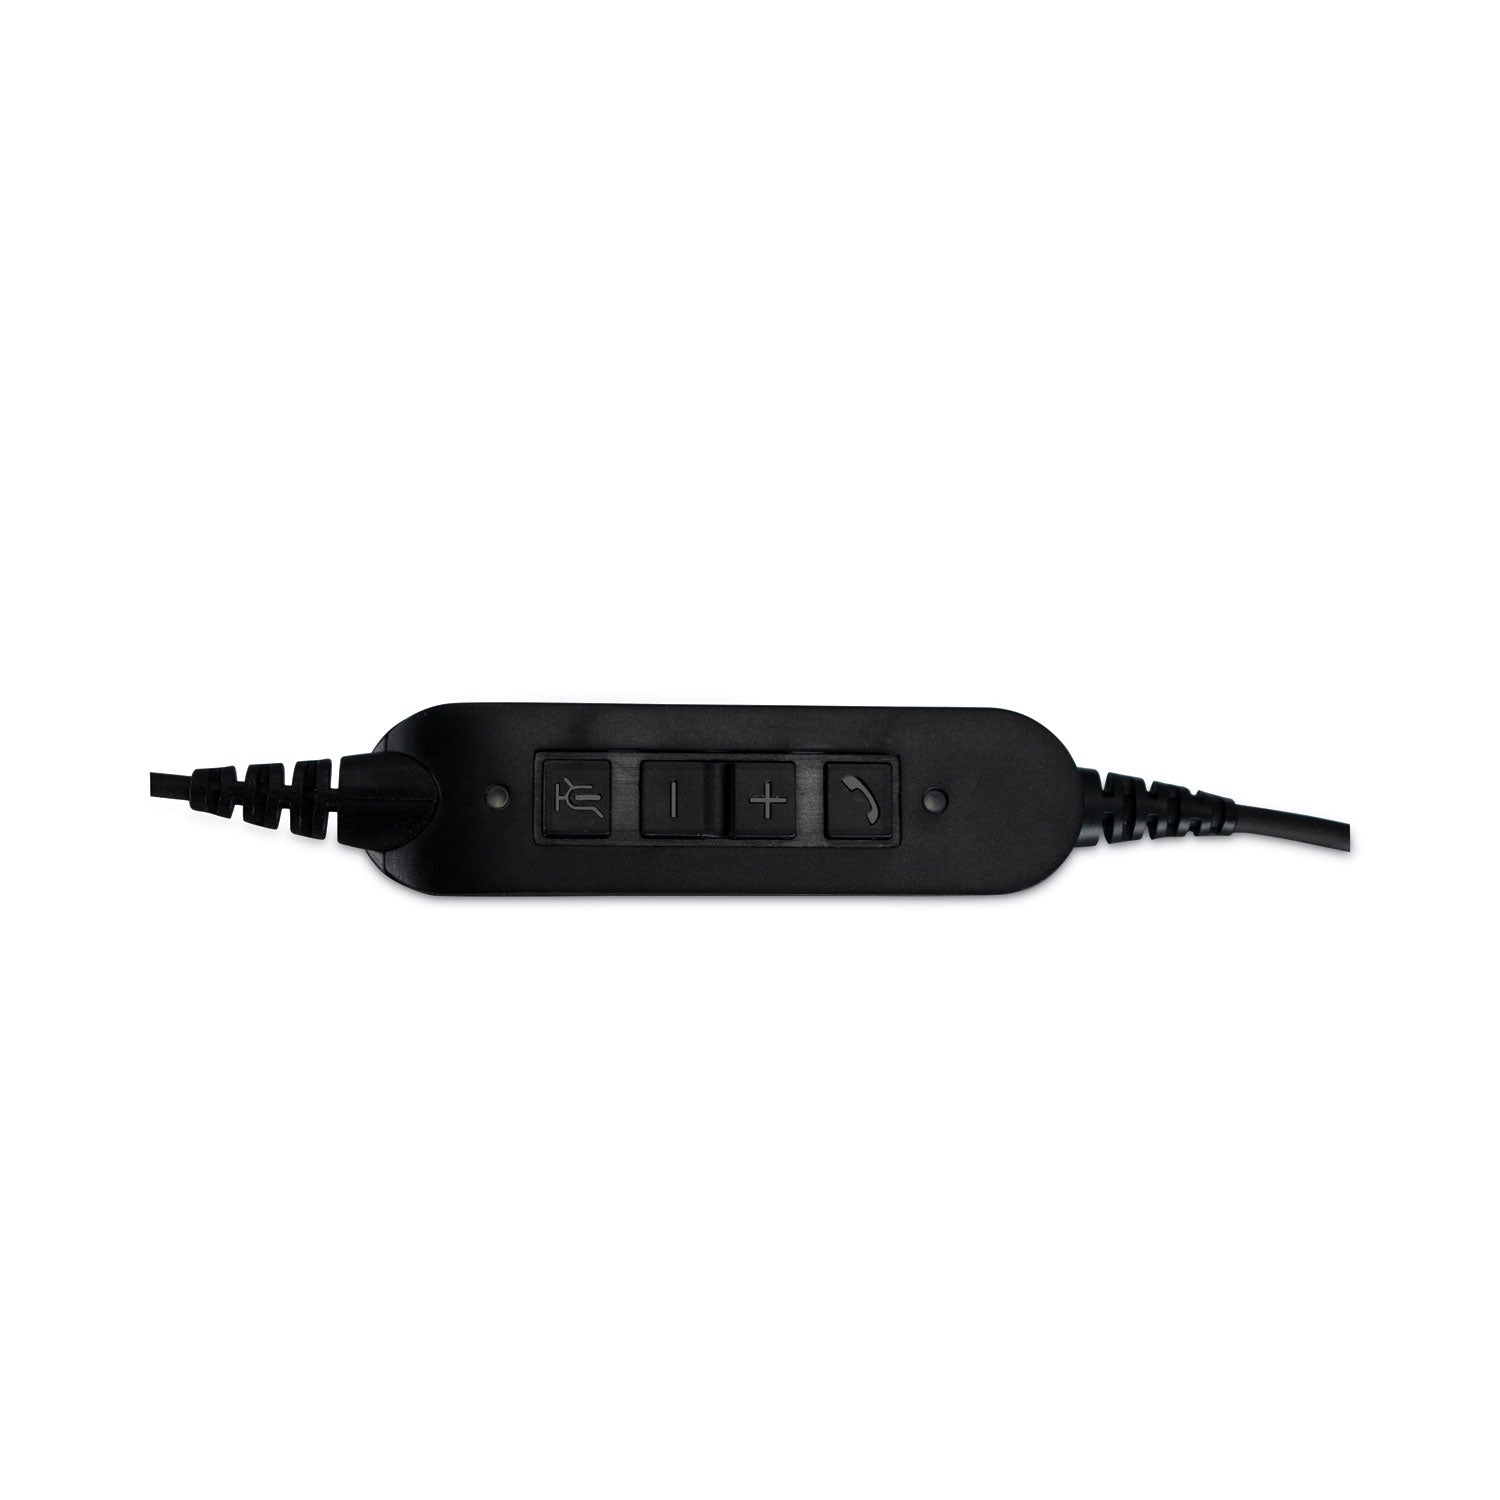 hs-wd-usb-1-monaural-over-the-head-headset-black_spthswdusb1 - 3